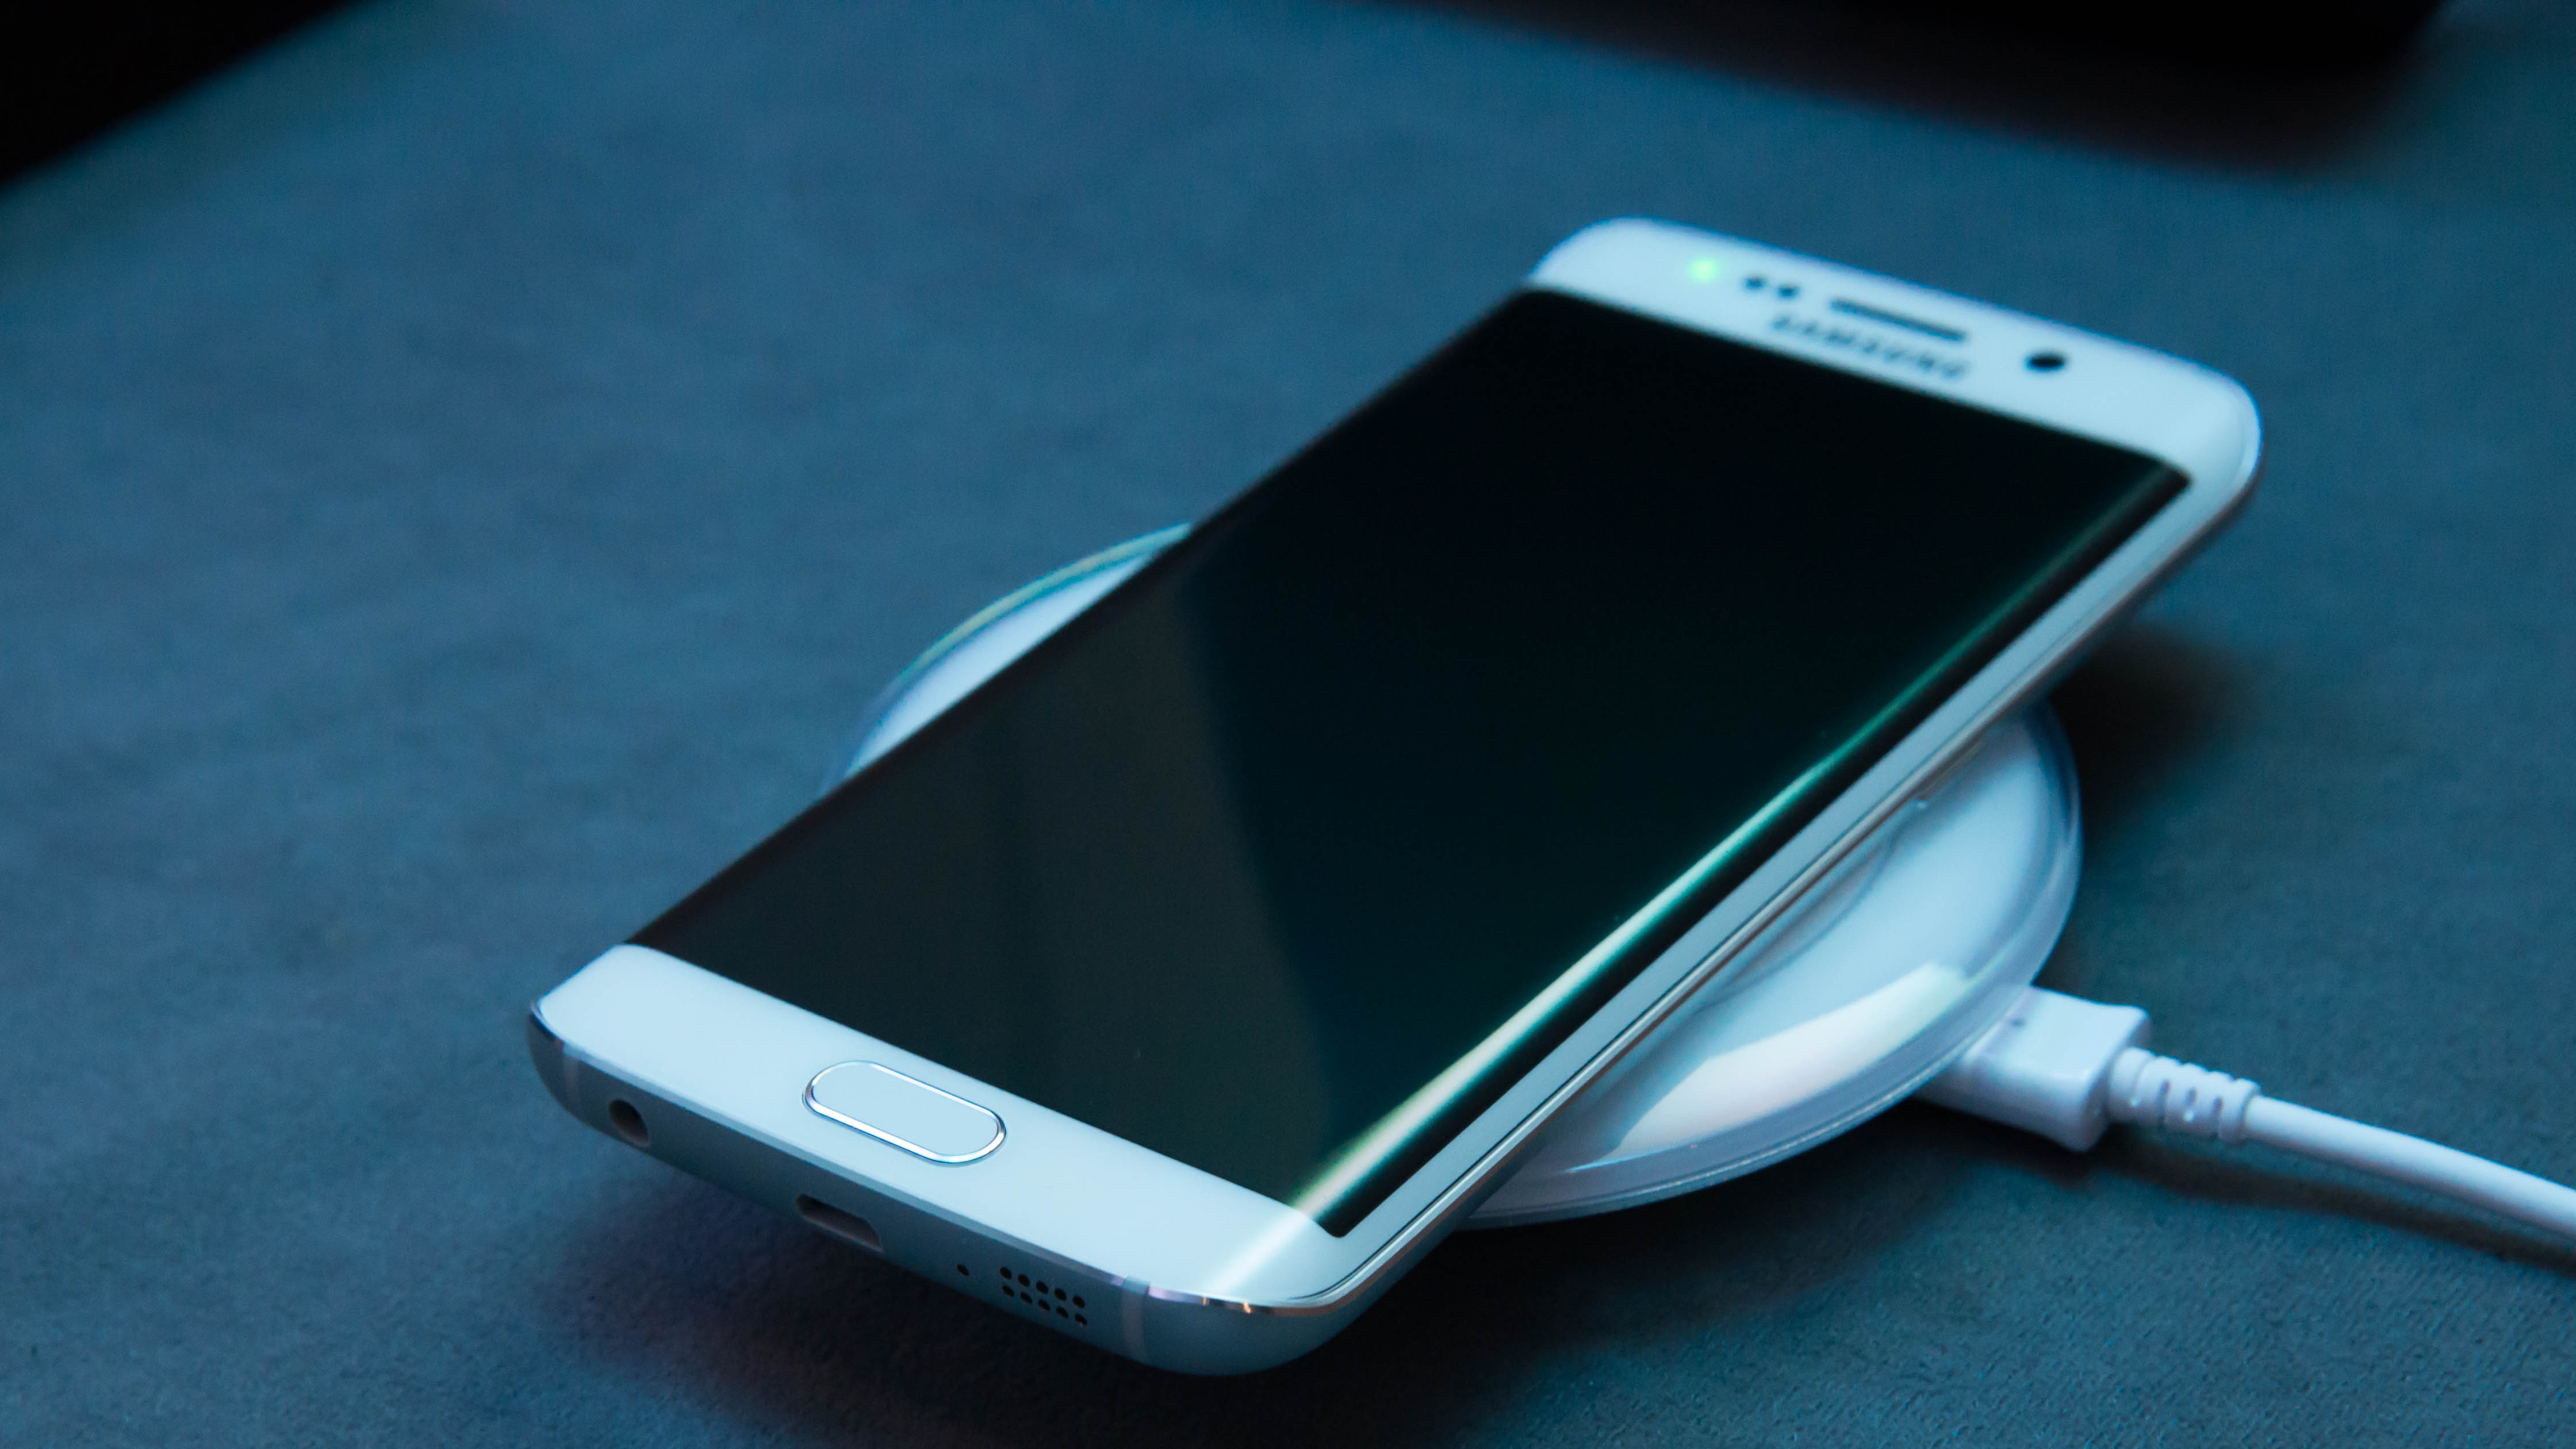 Fix Slow Charging Issue On Samsung Galaxy S6 Edge • Android Flagship